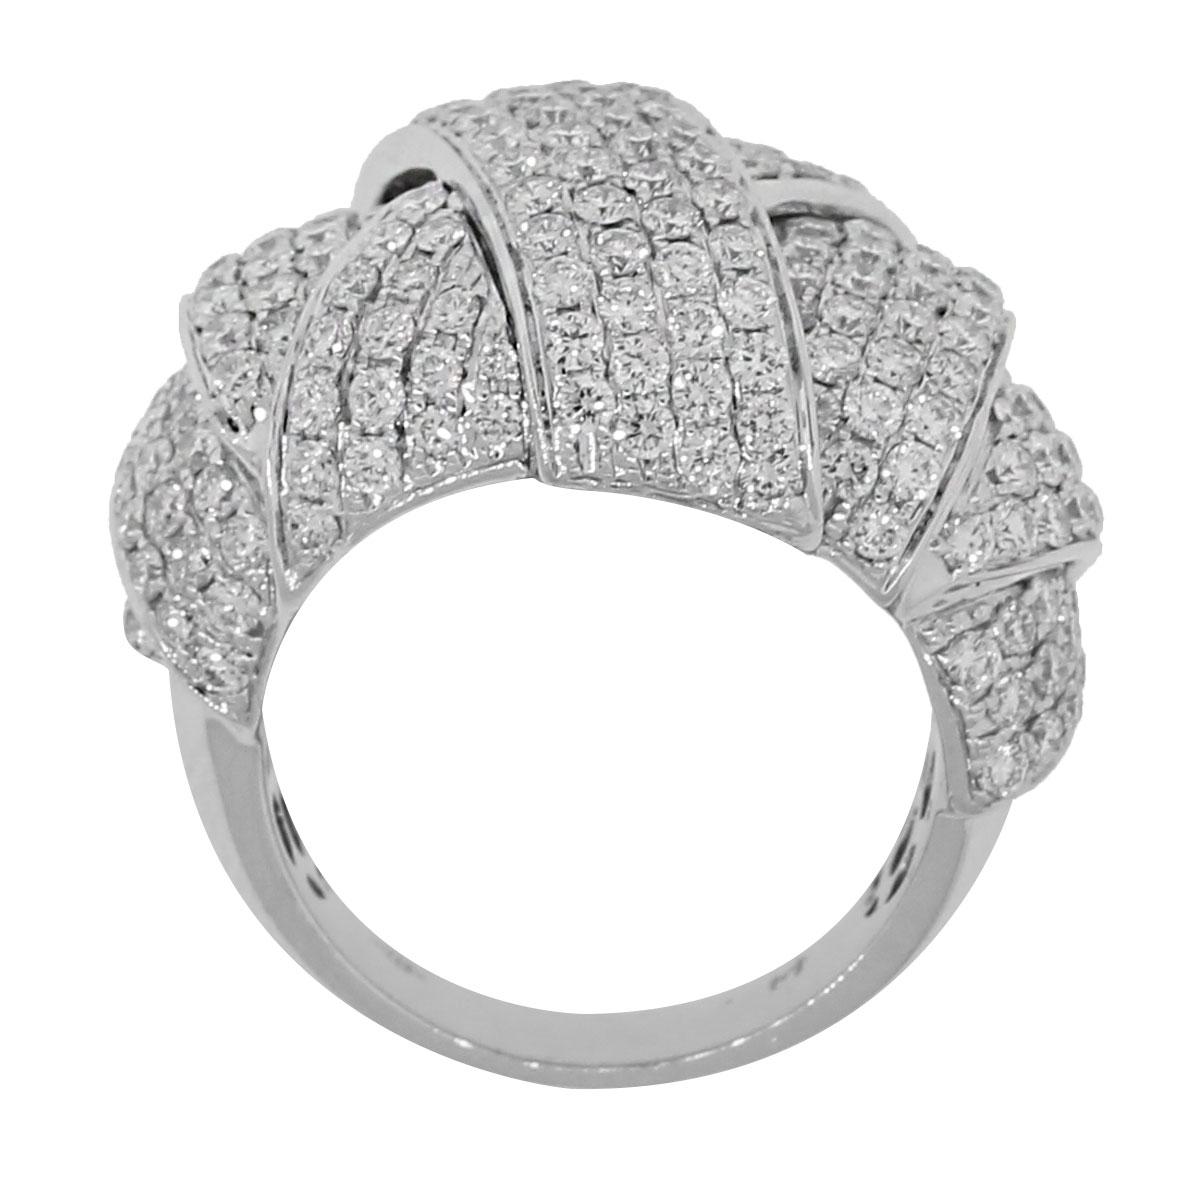 Material: 18k white gold
Diamonds Details: Approximately 3.71ctw of round brilliant diamonds. Diamonds are G/H in color and VS in clarity.
Ring Measurements: 1″ x 0.76″ x 1.01″
Size: 6.5
Weight: 16.1g
SKU: A30312207